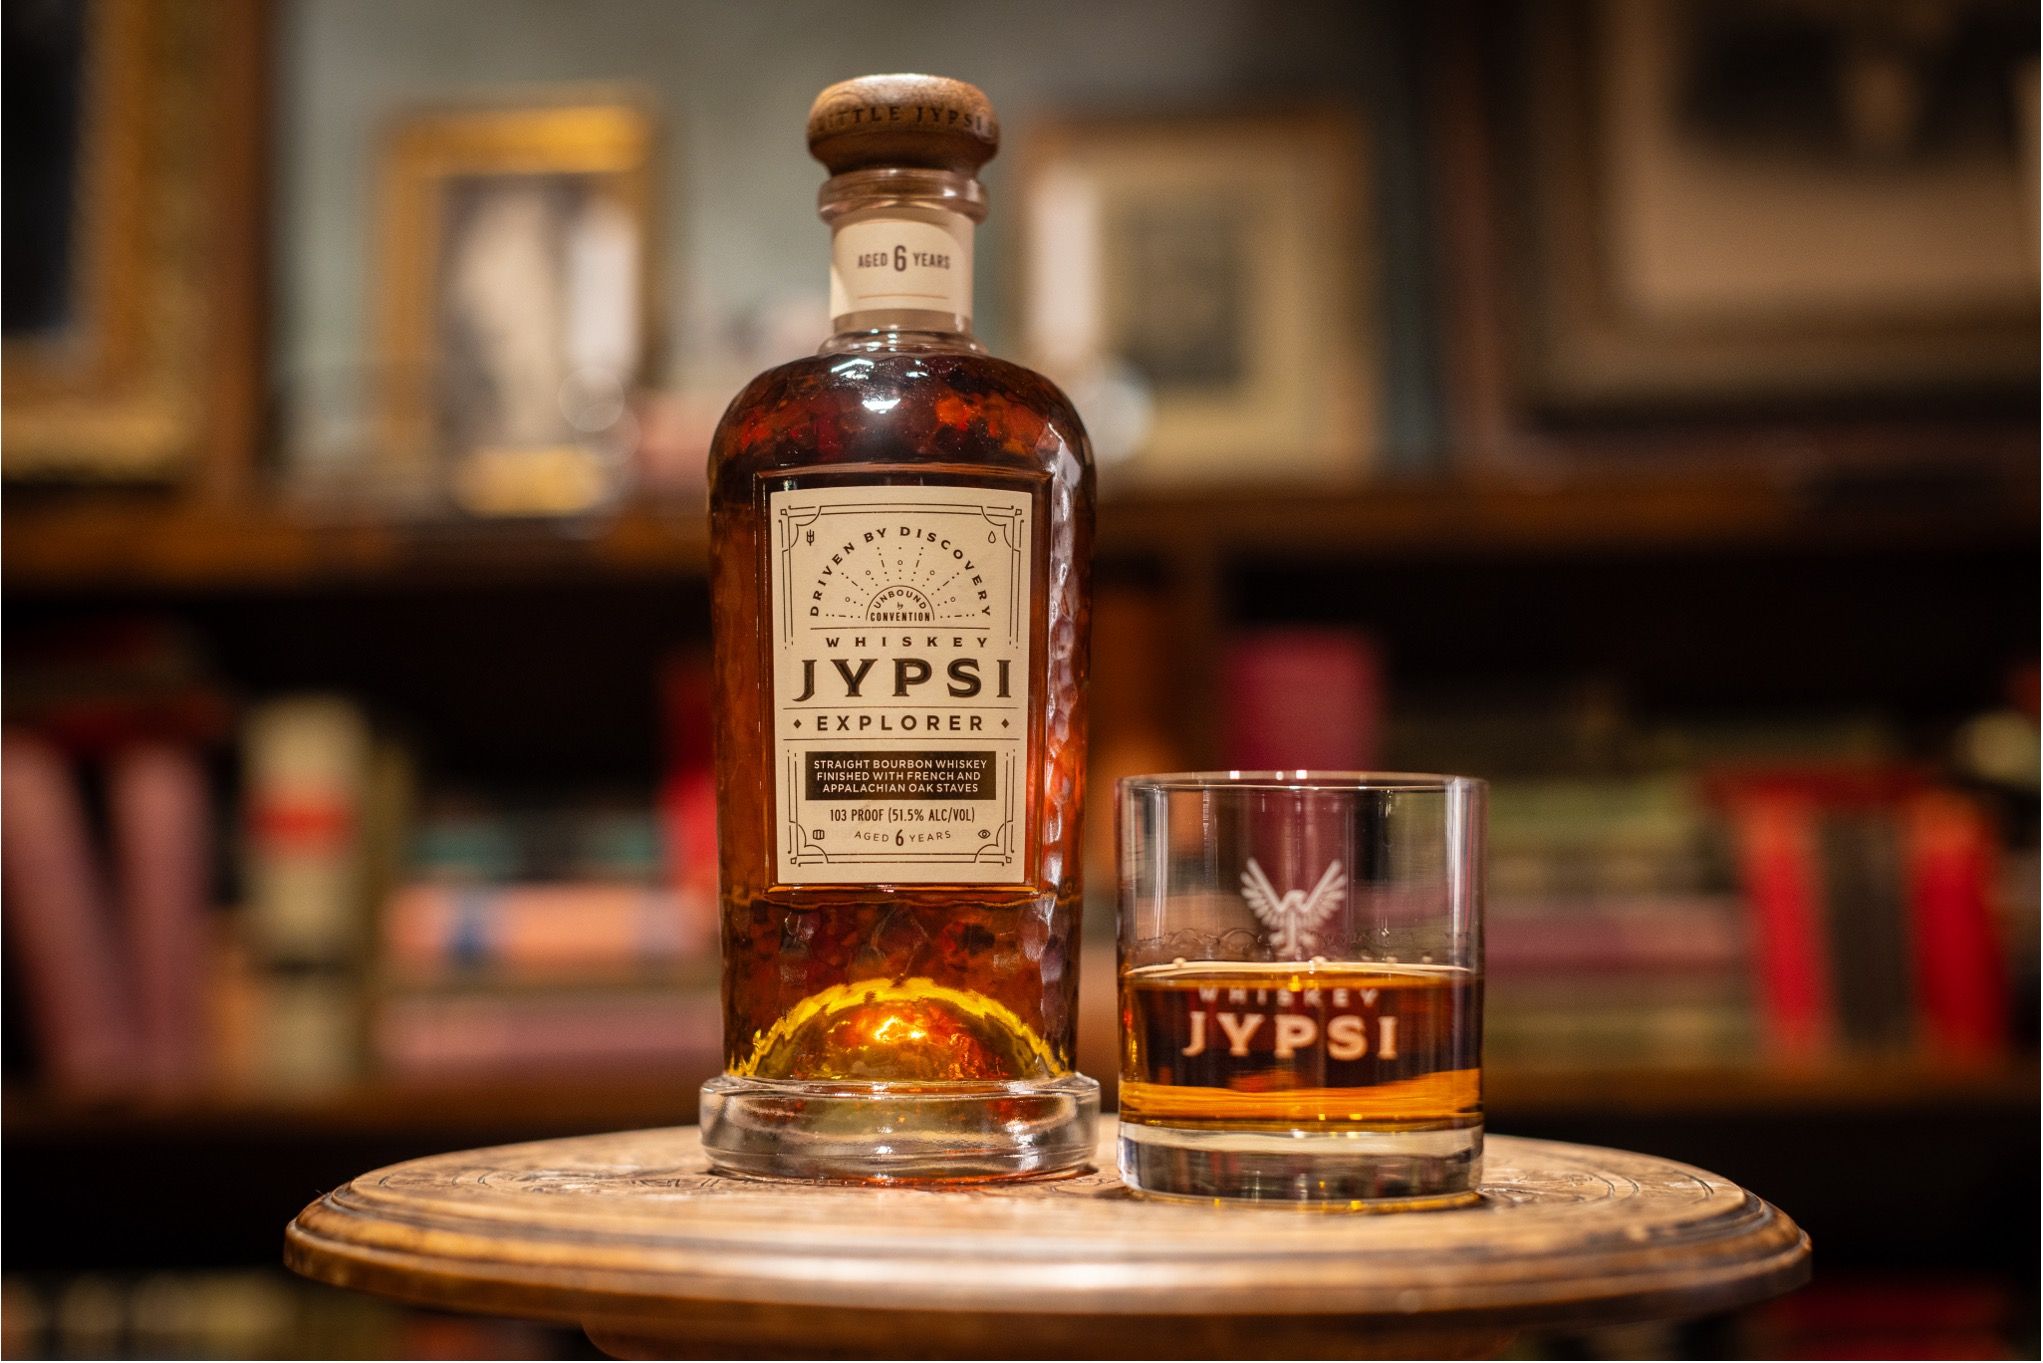 ERIC CHURCH AND OUTSIDERS SPIRITS ANNOUNCE NEXT RELEASE FROM WHISKEY JYPSI